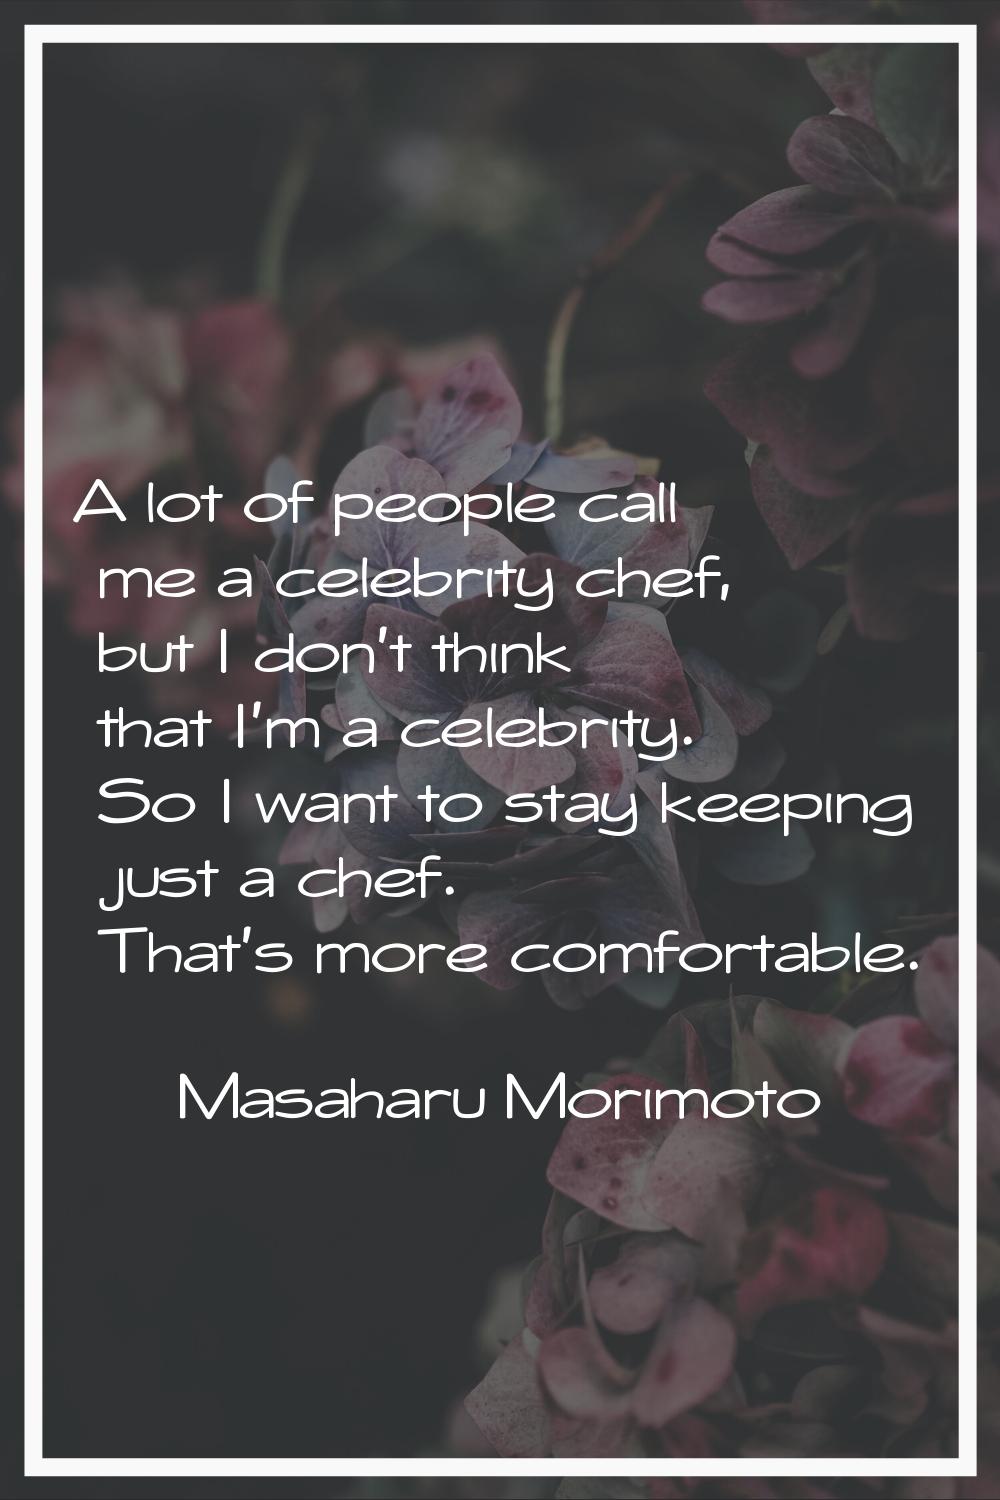 A lot of people call me a celebrity chef, but I don't think that I'm a celebrity. So I want to stay